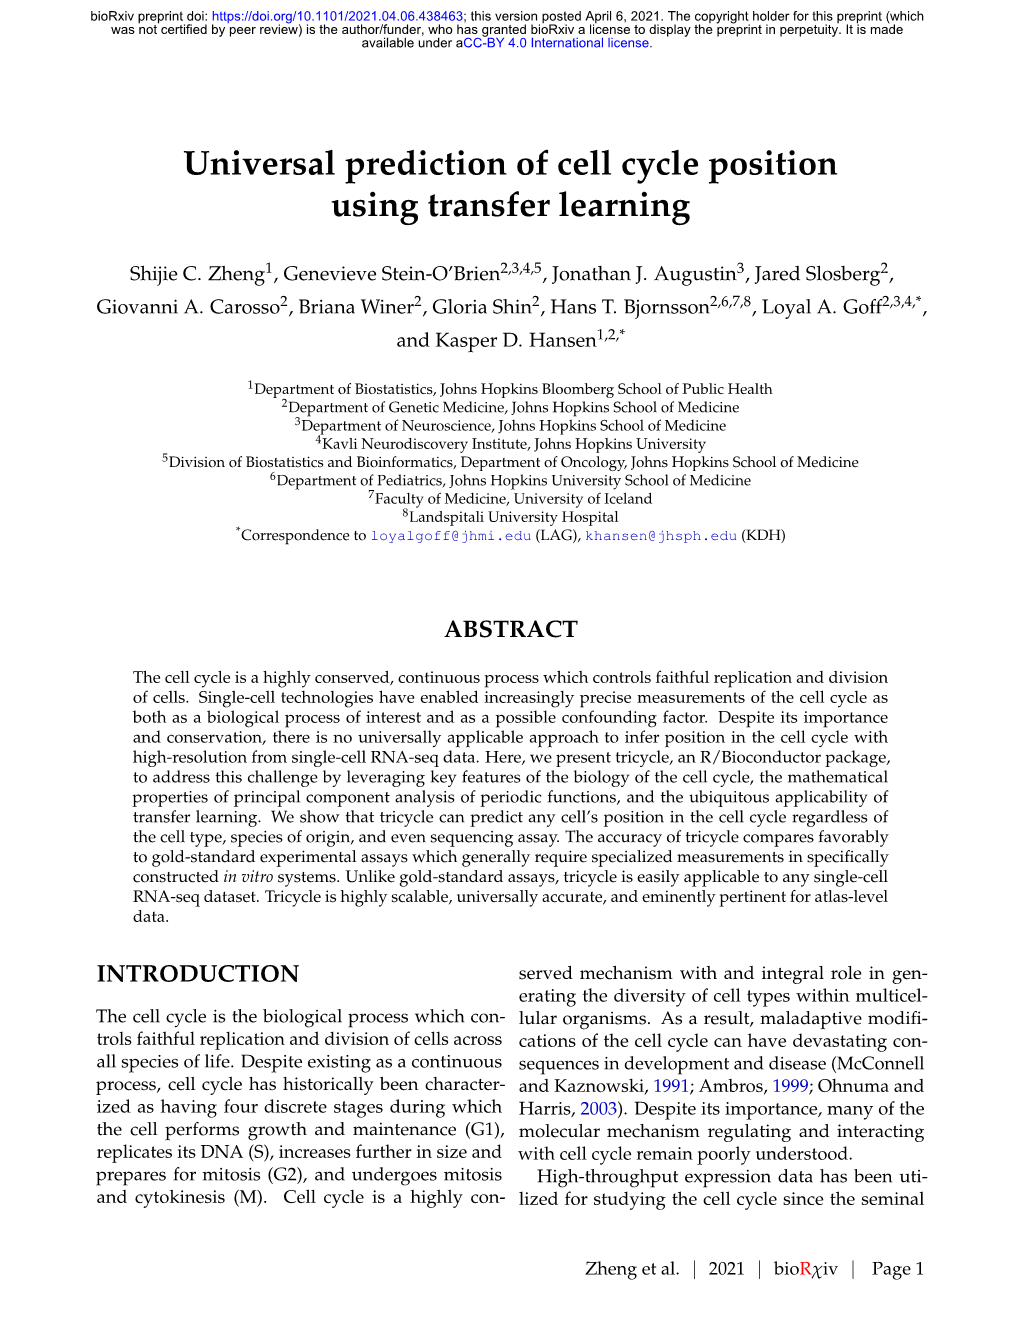 Universal Prediction of Cell Cycle Position Using Transfer Learning